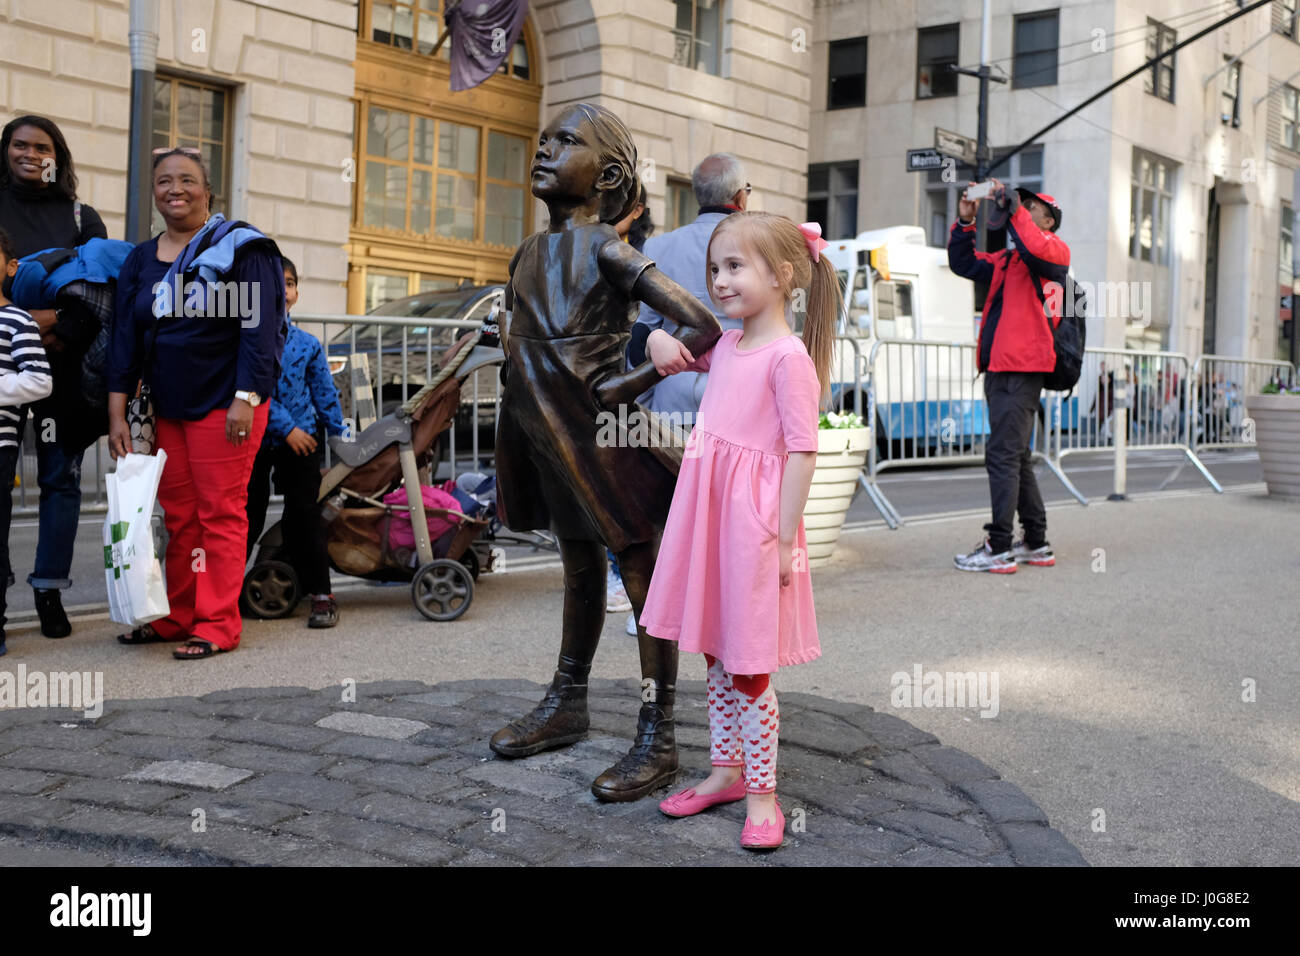 NEW YORK, NY: A little girl poses next to the 'Fearless Girl' statue in the financial district of lower Manhattan.  04/09/17 Stock Photo